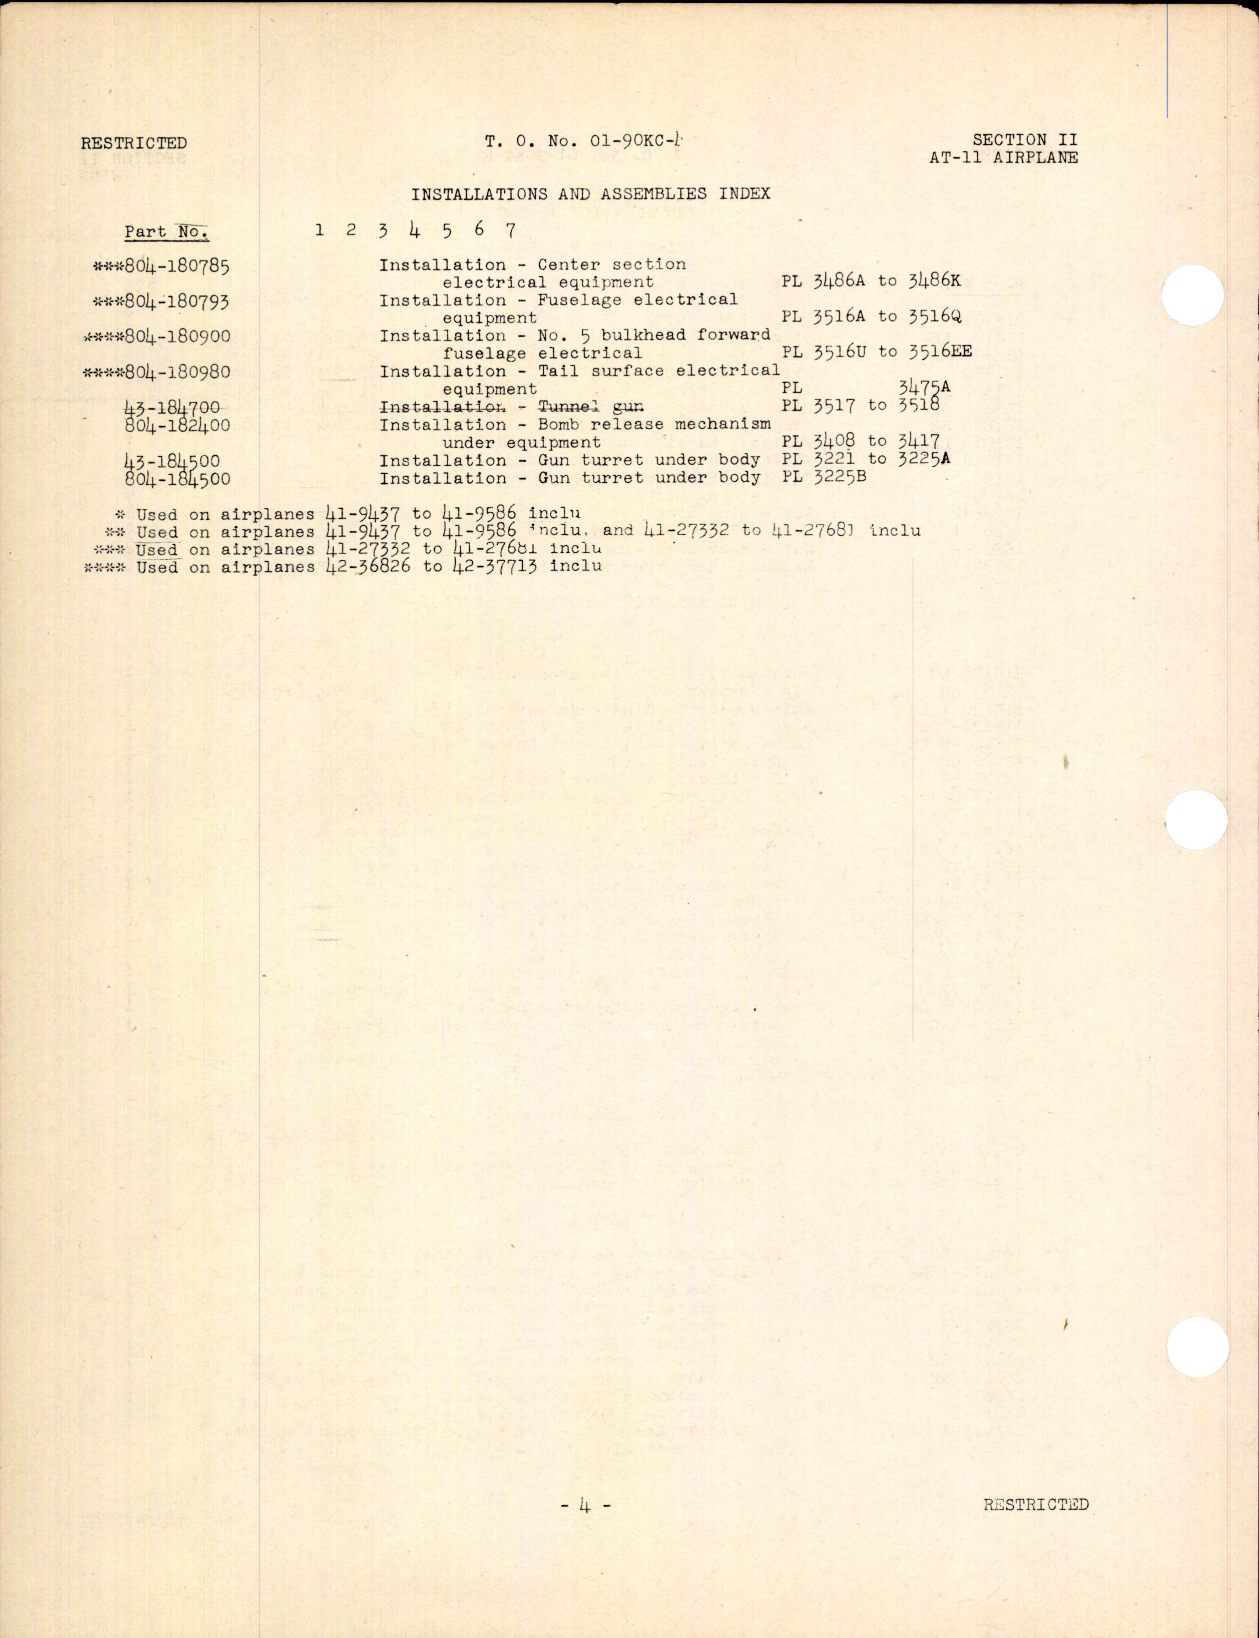 Sample page 8 from AirCorps Library document: Parts Catalog for AT-11 Airplane